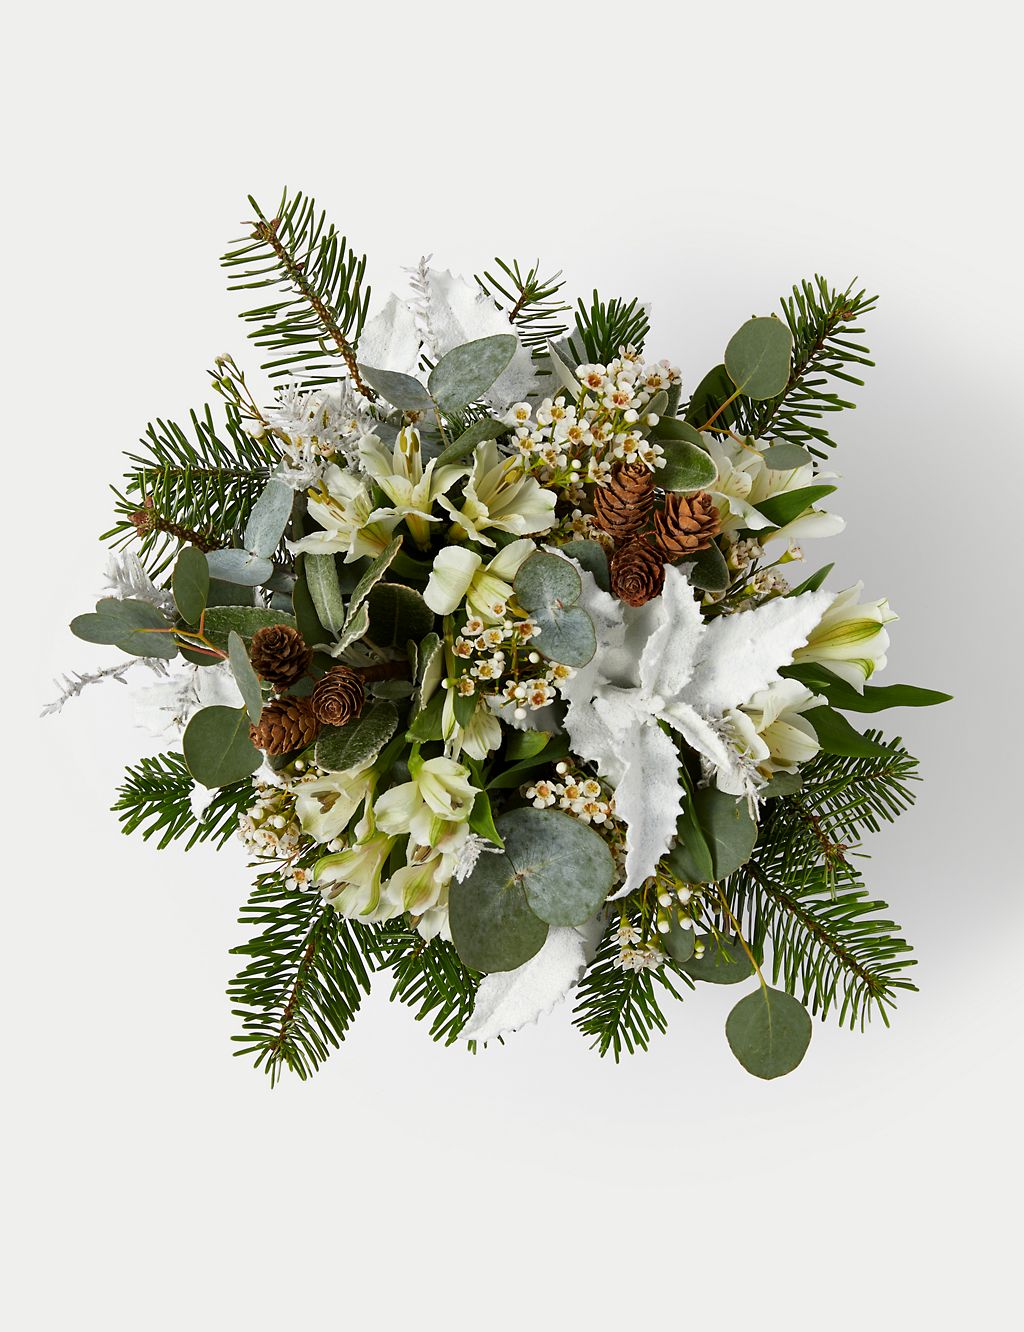 Create Your Own Christmas Table Arrangement 1 of 7